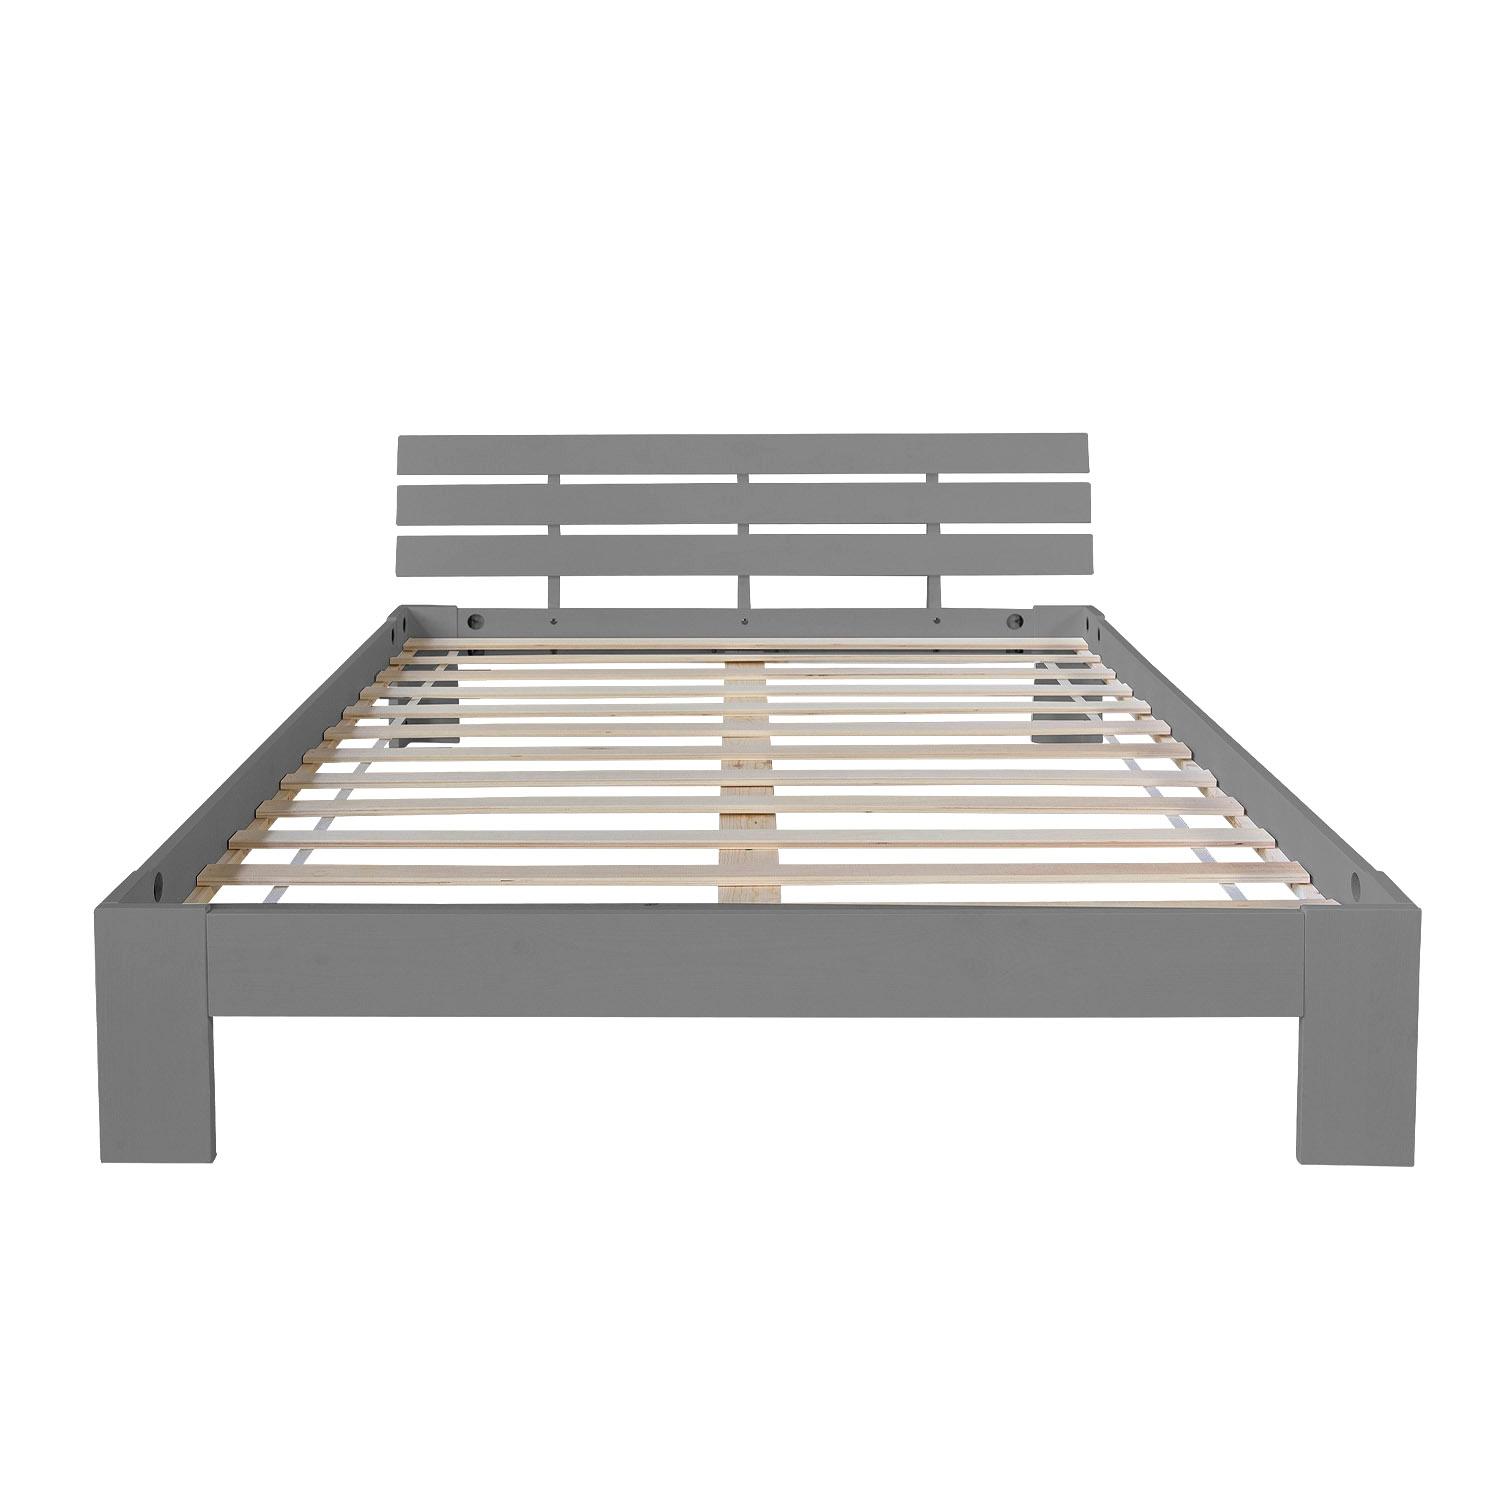 Double Bed Wooden Bed Futon Bed 120x200 Grey Pine Bed Frame Solid Wood